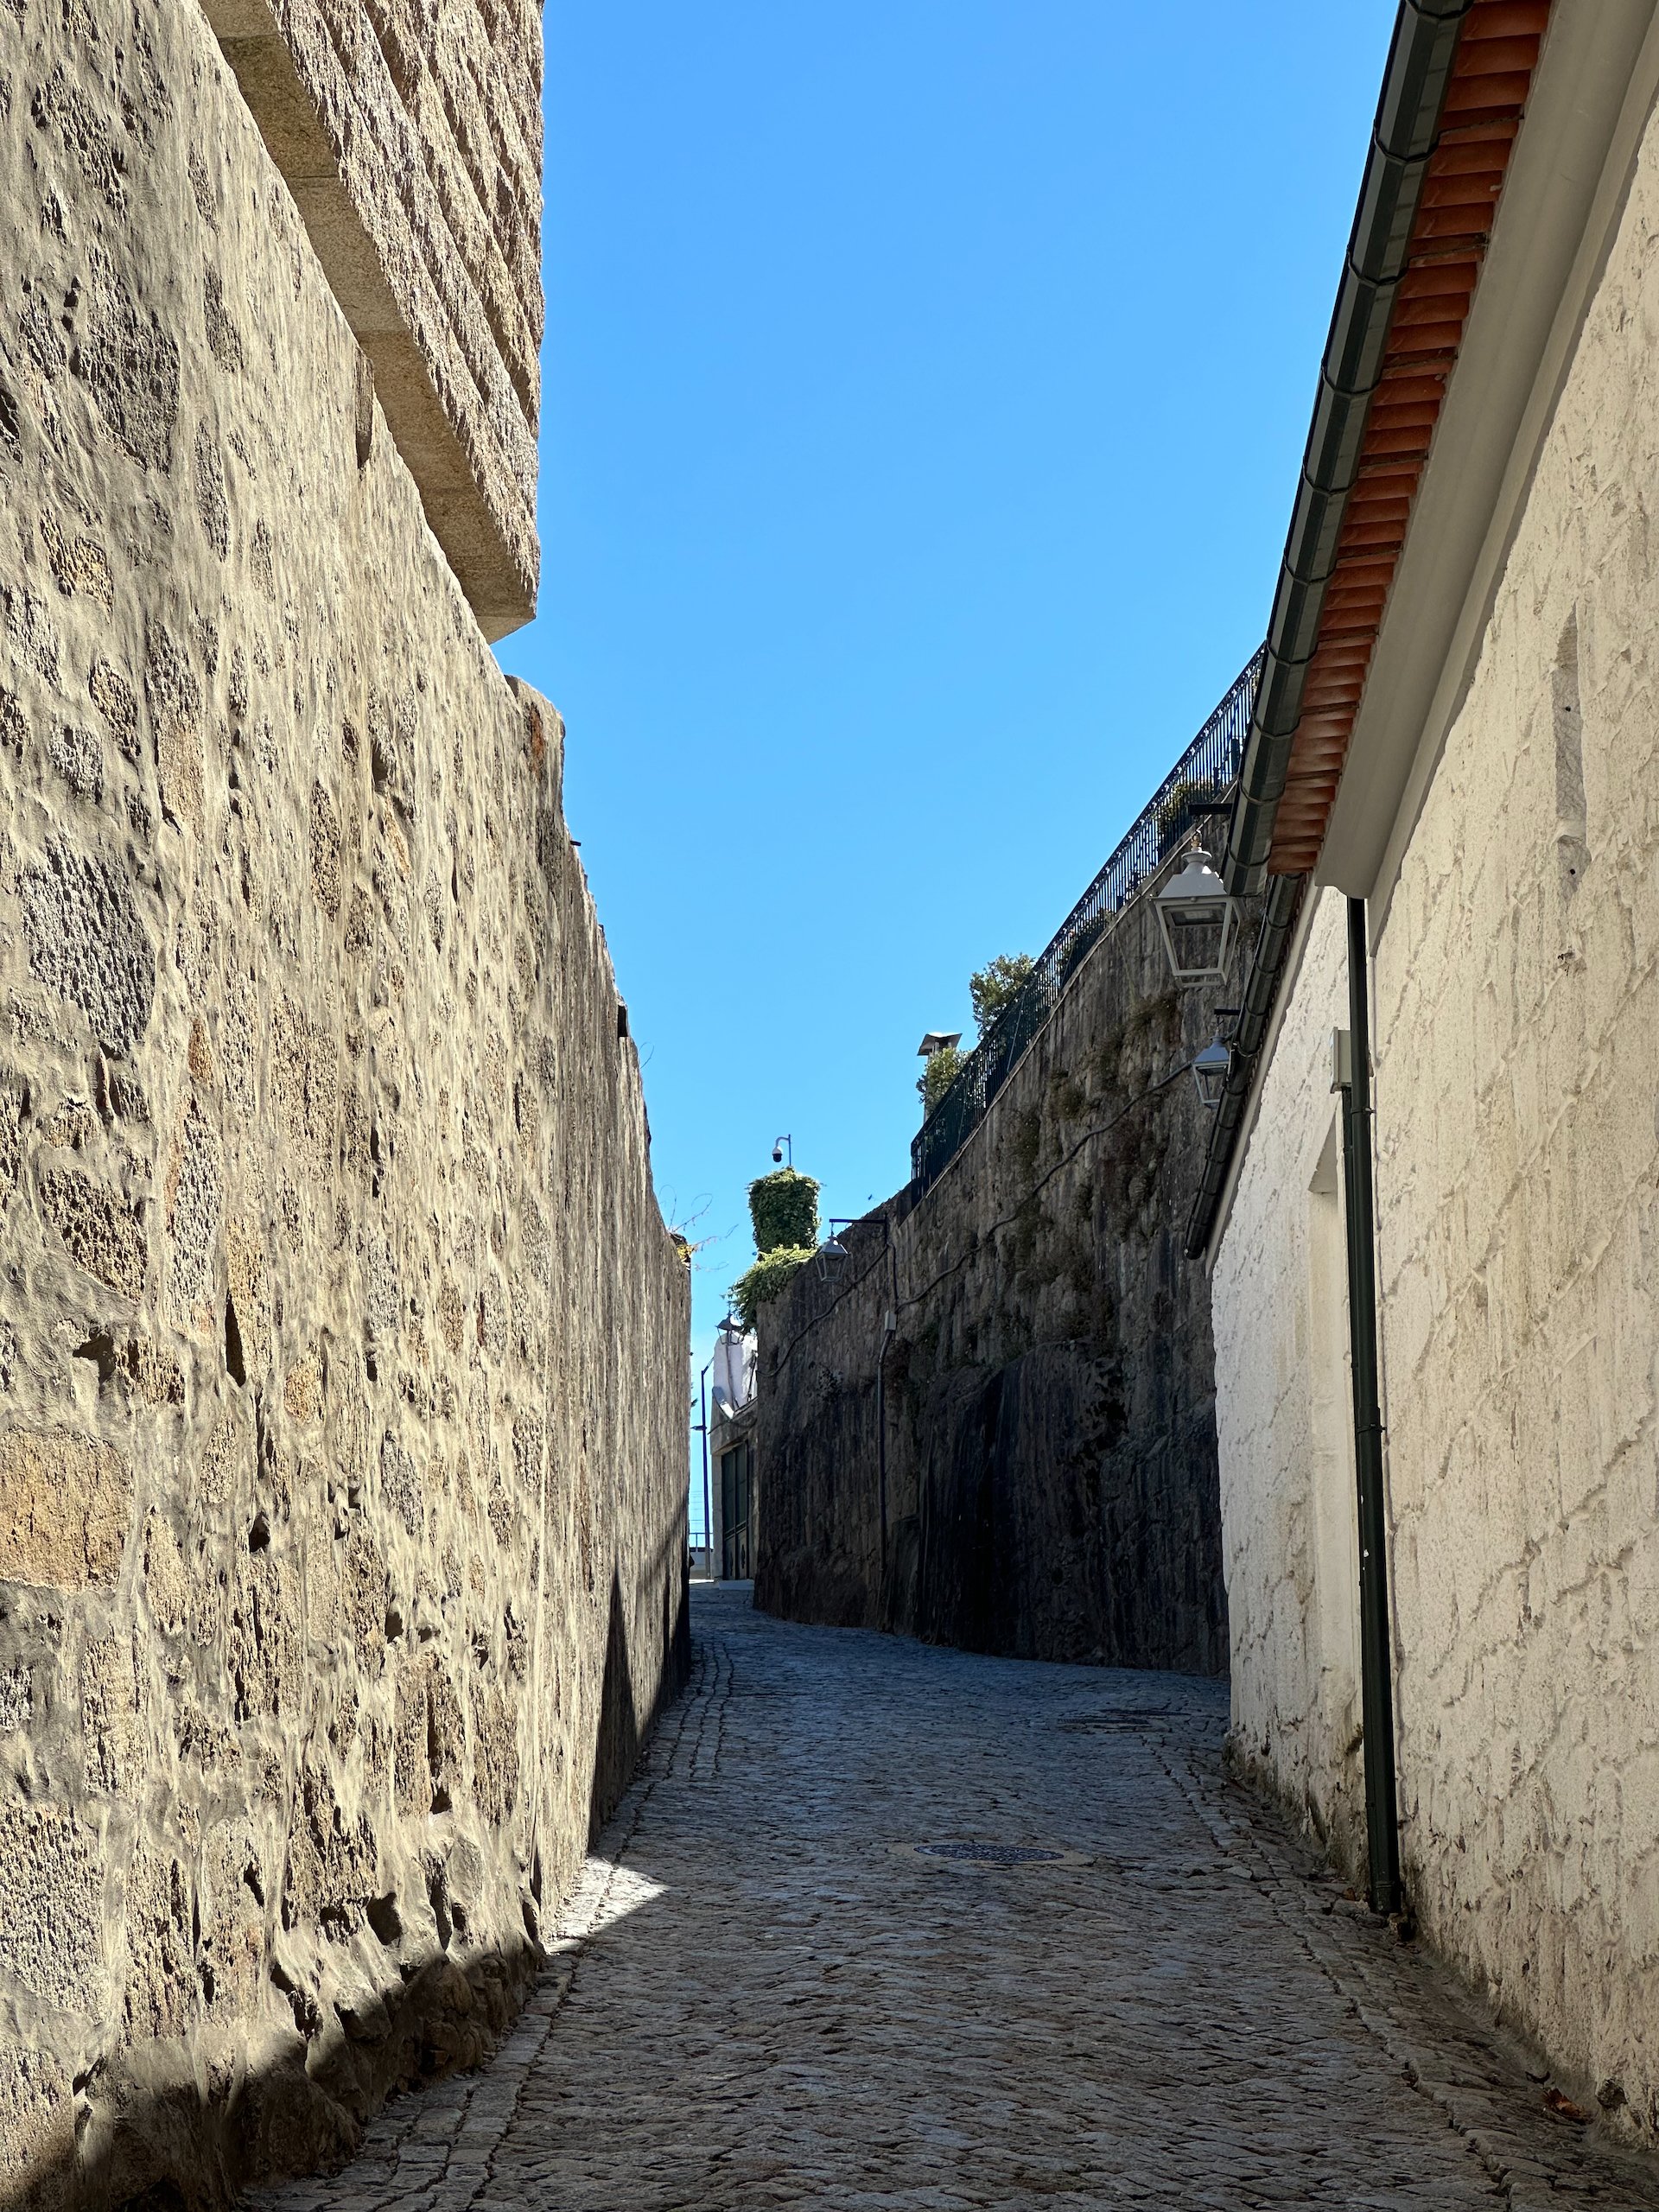  Walking up to the port houses, we were on streets like this, narrow and steep. 